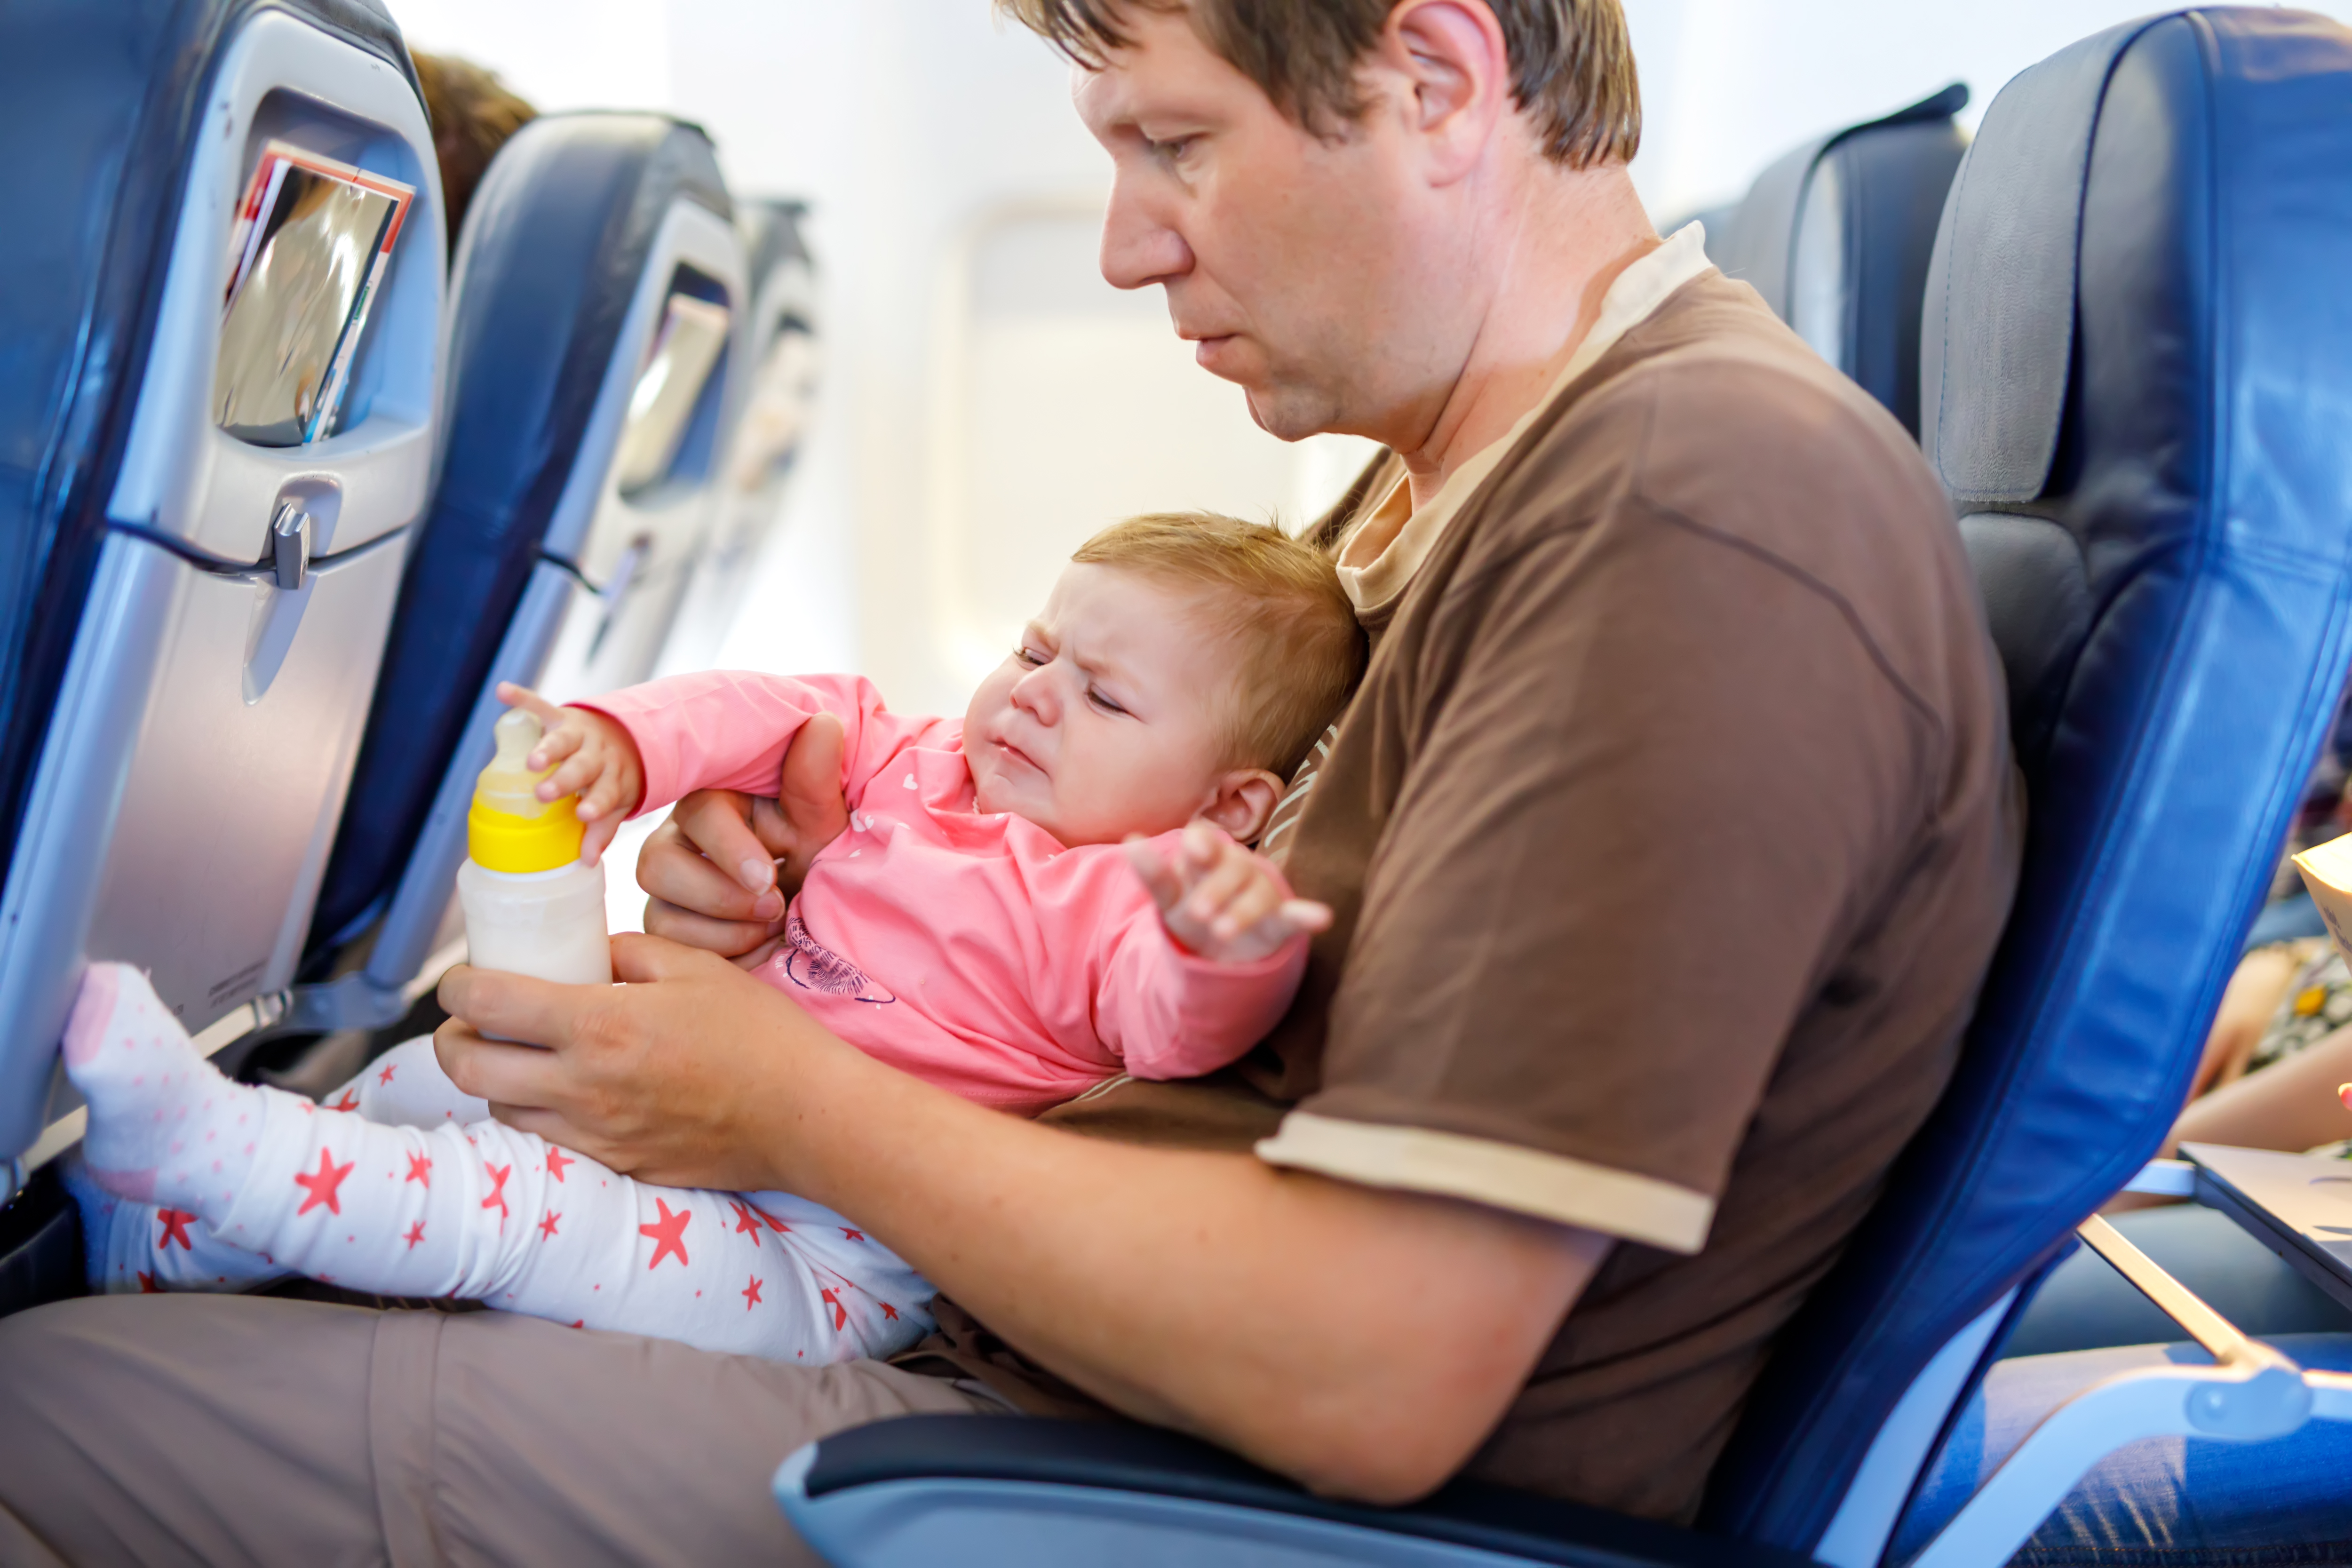 It’s never fun being the parent of the toddler having a meltdown on a flight